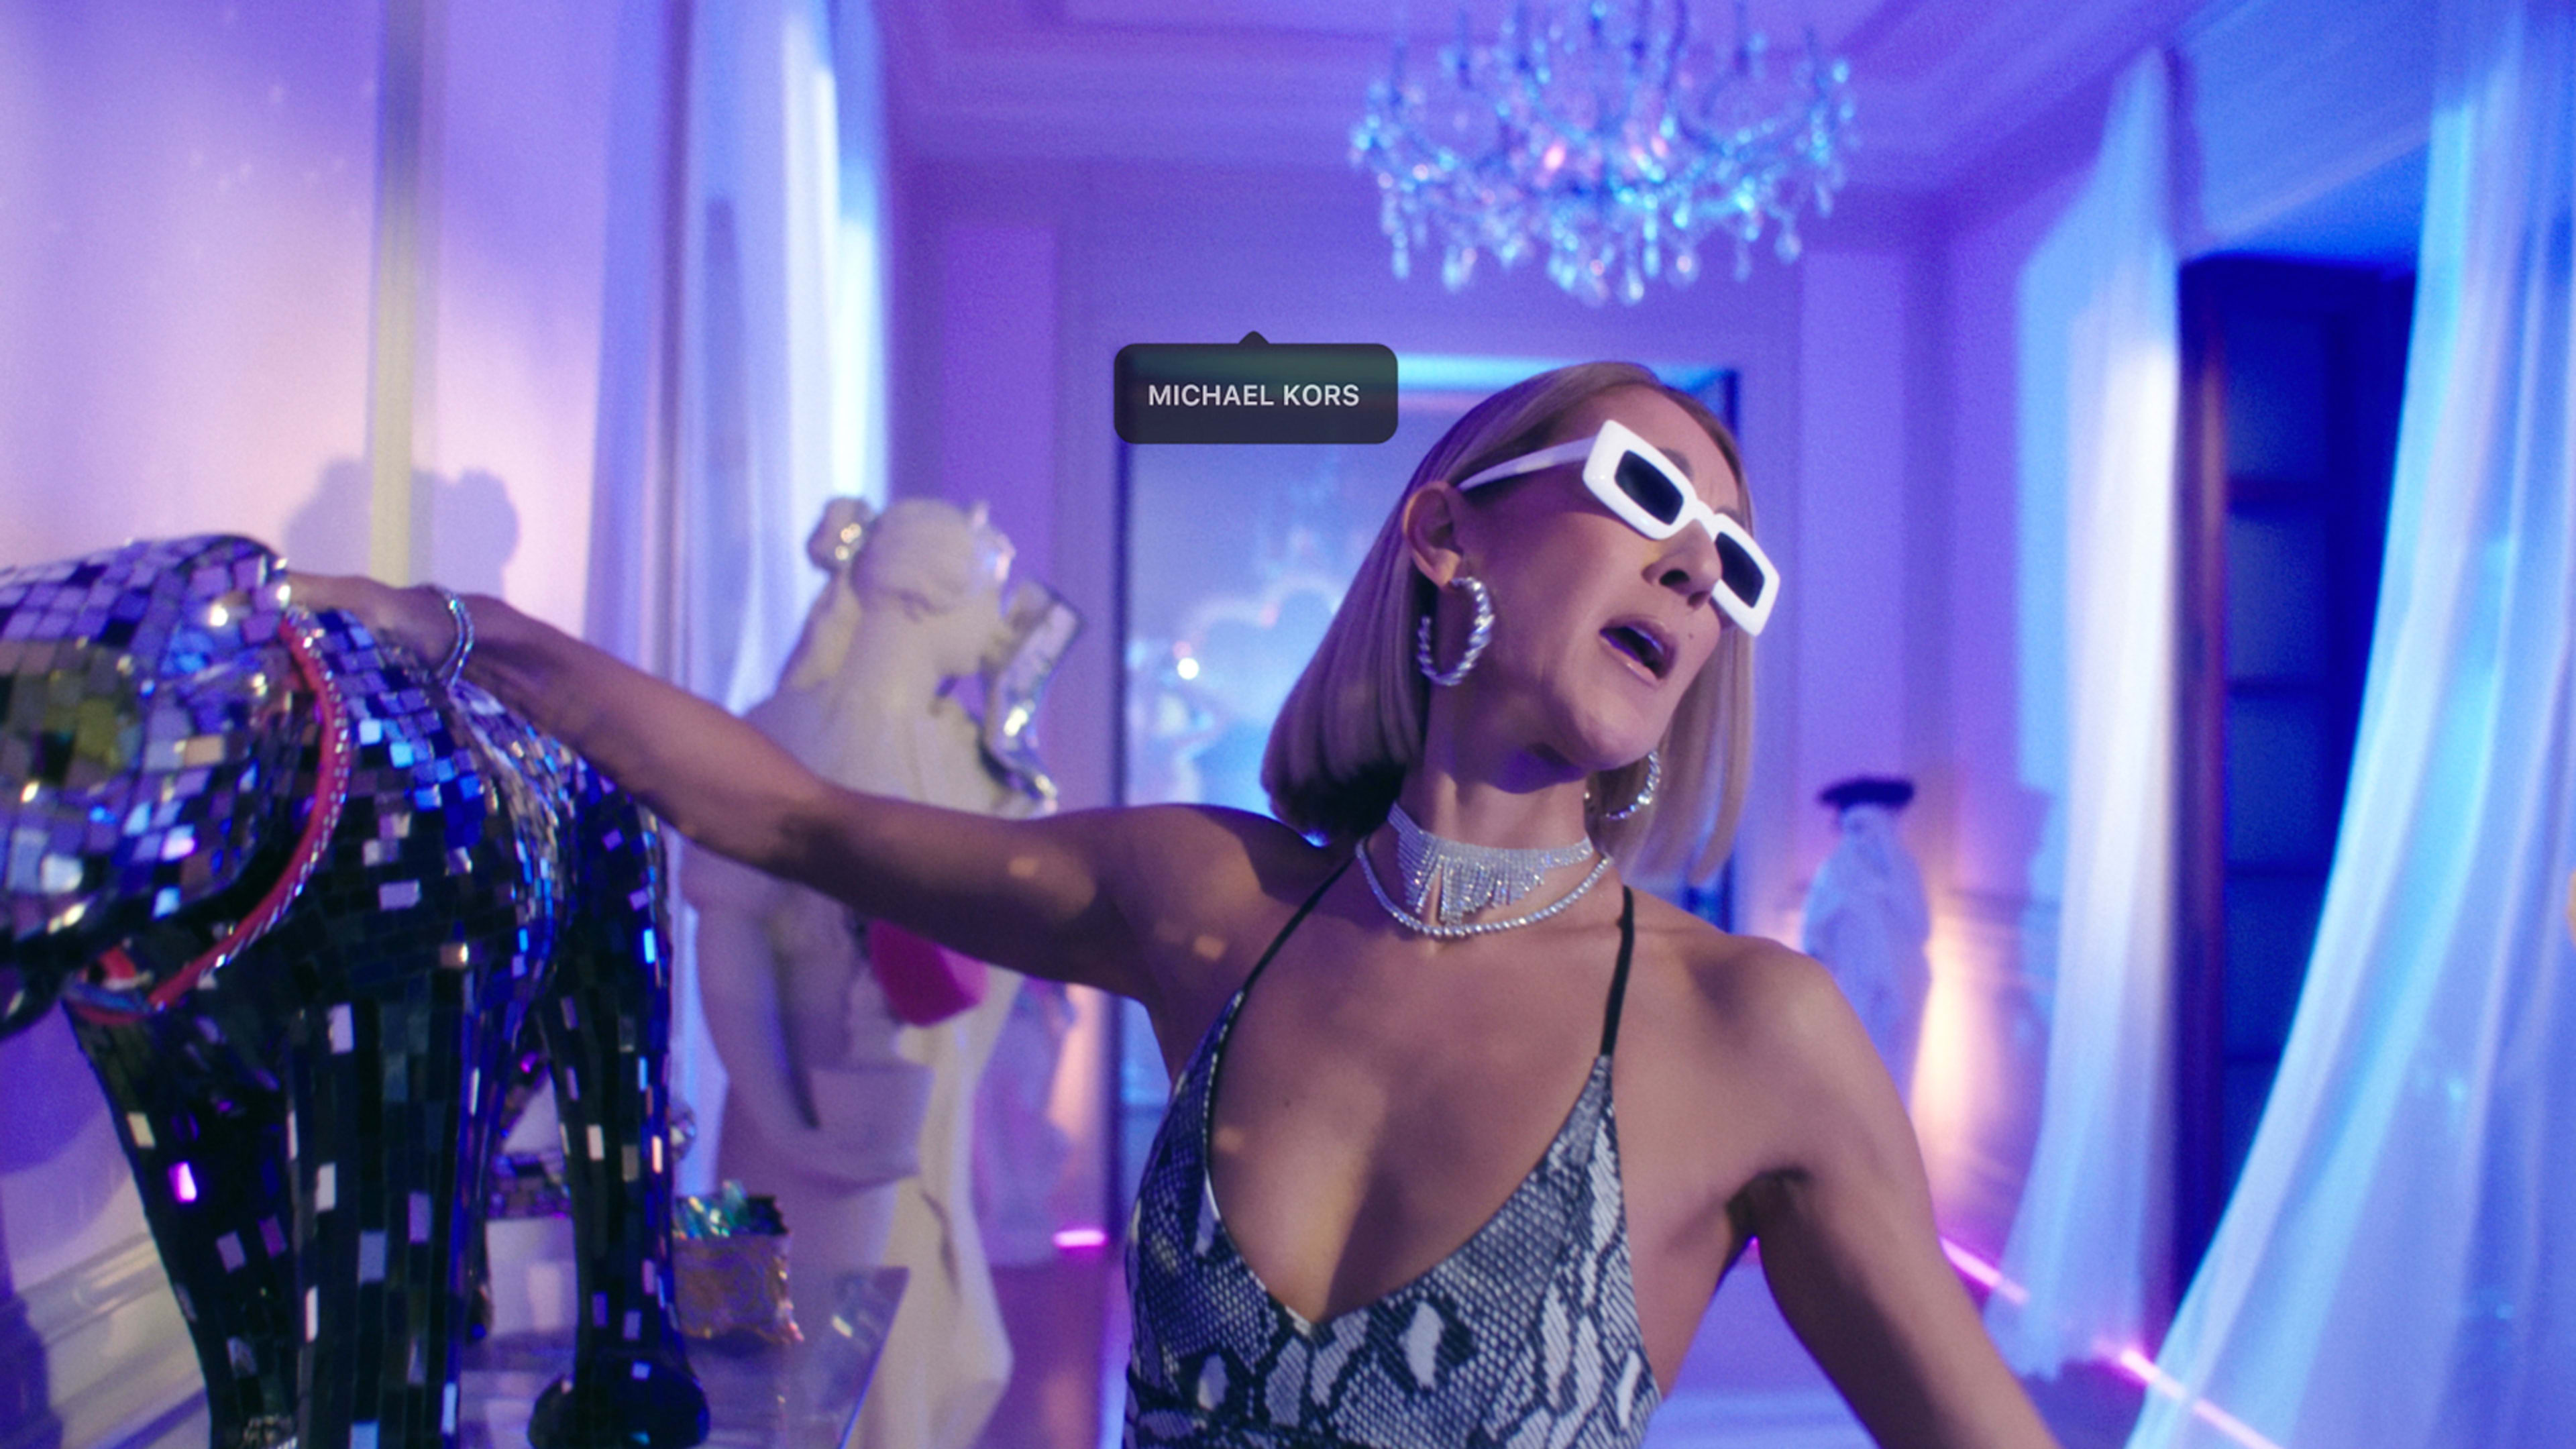 Instagram just recreated Céline Dion’s “It’s All Coming Back to Me Now” as a shoppable video